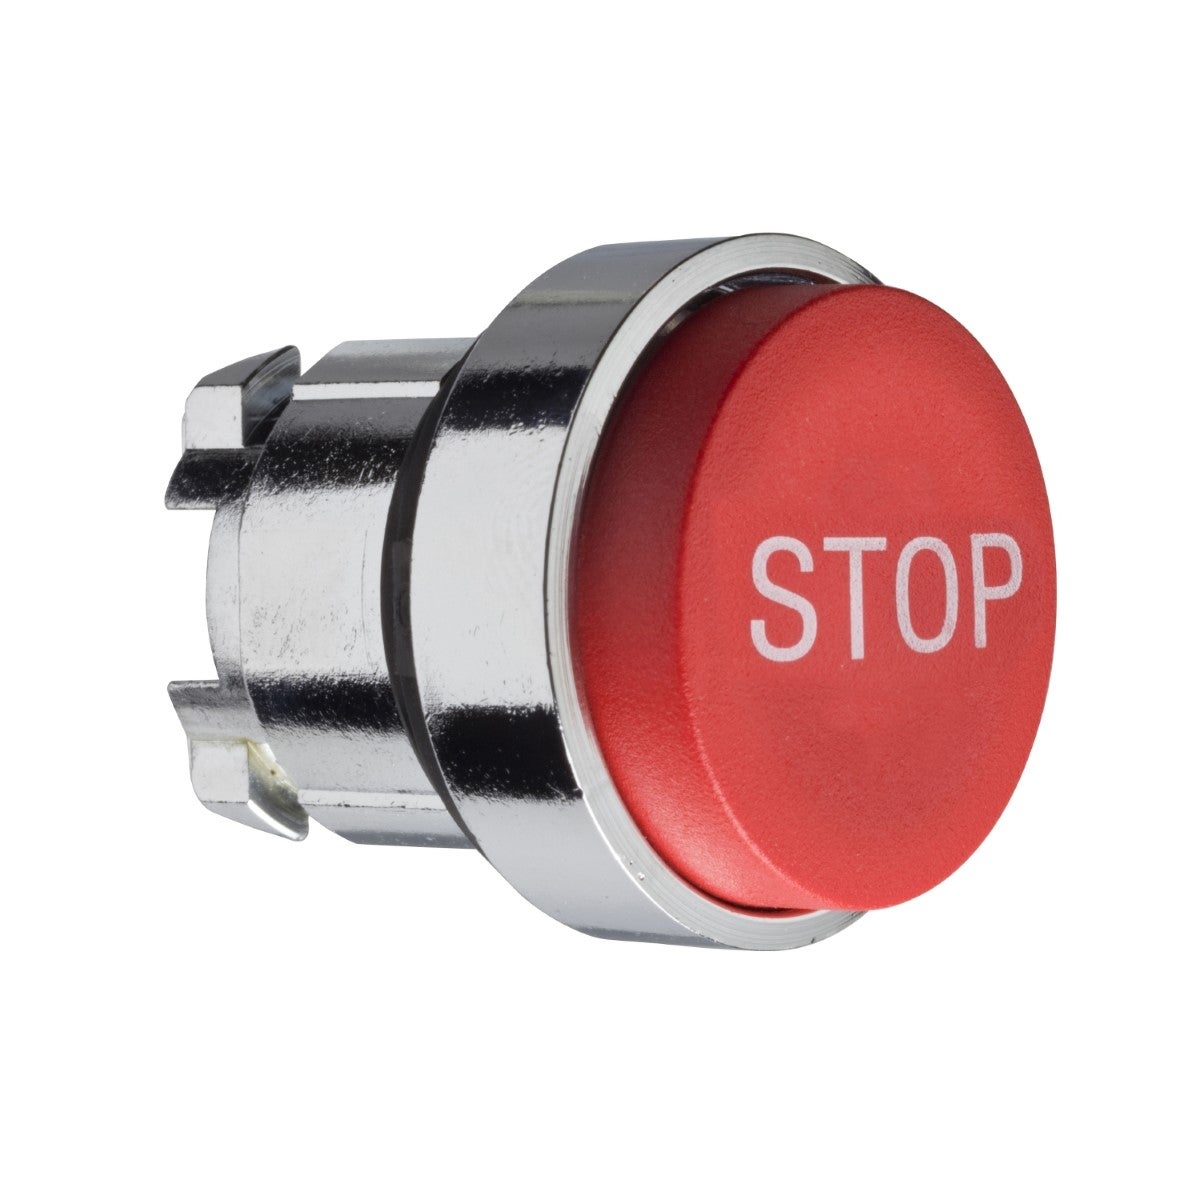 Projecting push button head 40mm, Harmony XB4, metal, red, 22mm, spring return, marked STOP